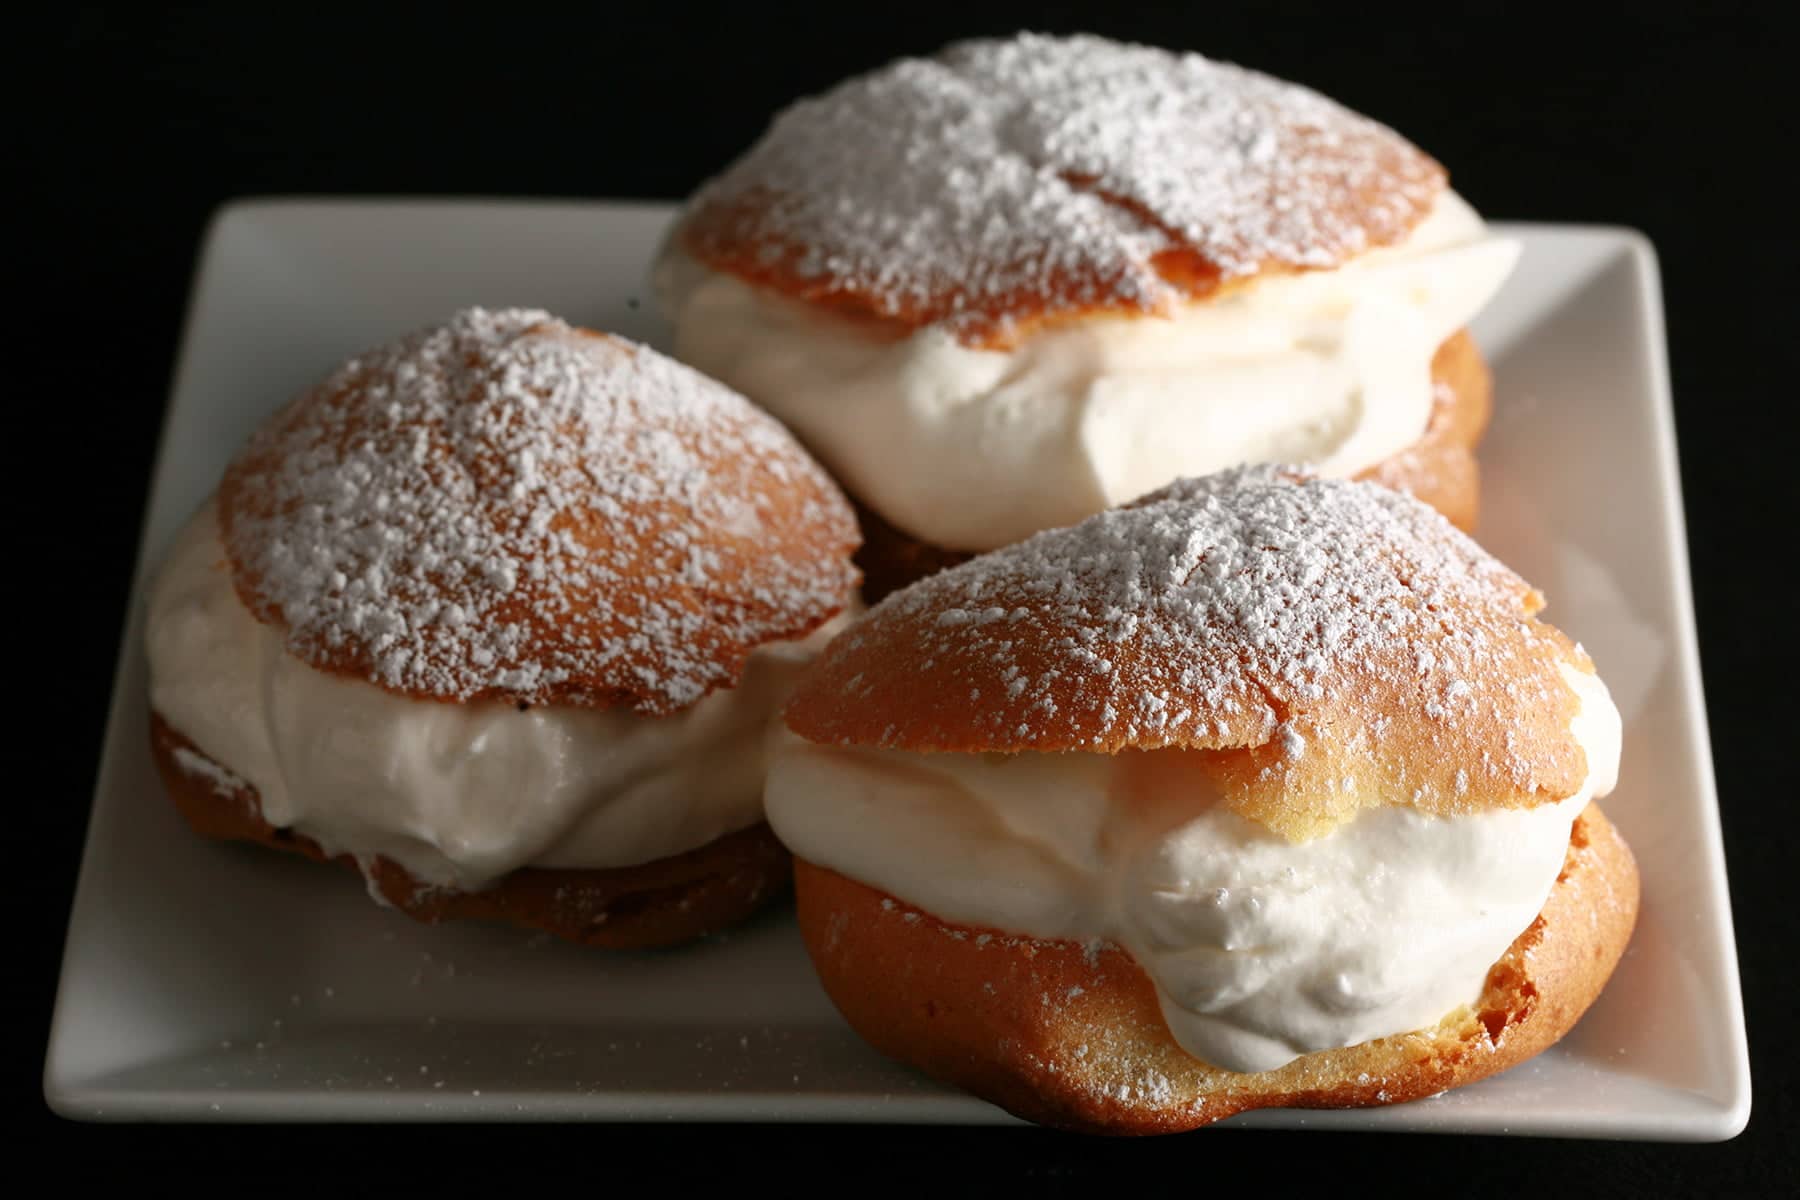 3 Large Cream puffs - with whipped cream in the center, topped with powdered sugar - are pictured on a white plate.